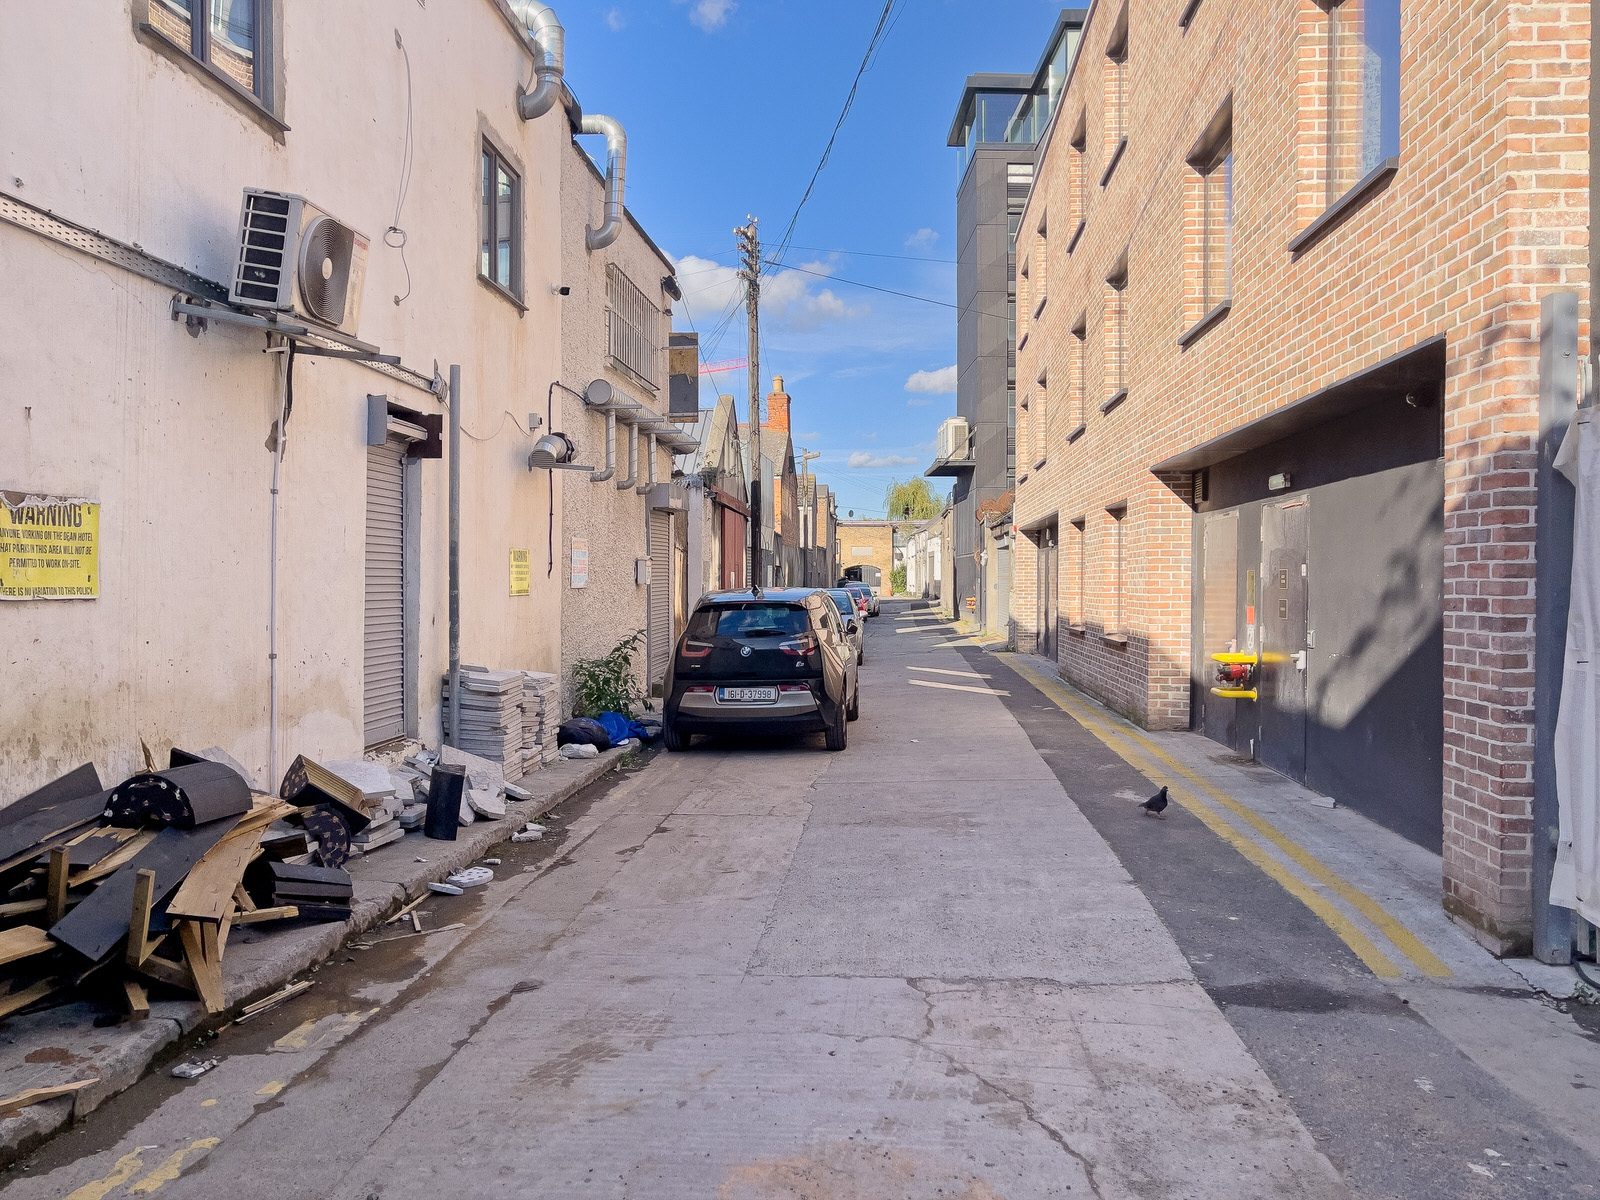 CAMDEN PLACE [COMPLEX OF LANES BETWEEN HARCOURT STREET AND WEXFORD STREET]-225038-1